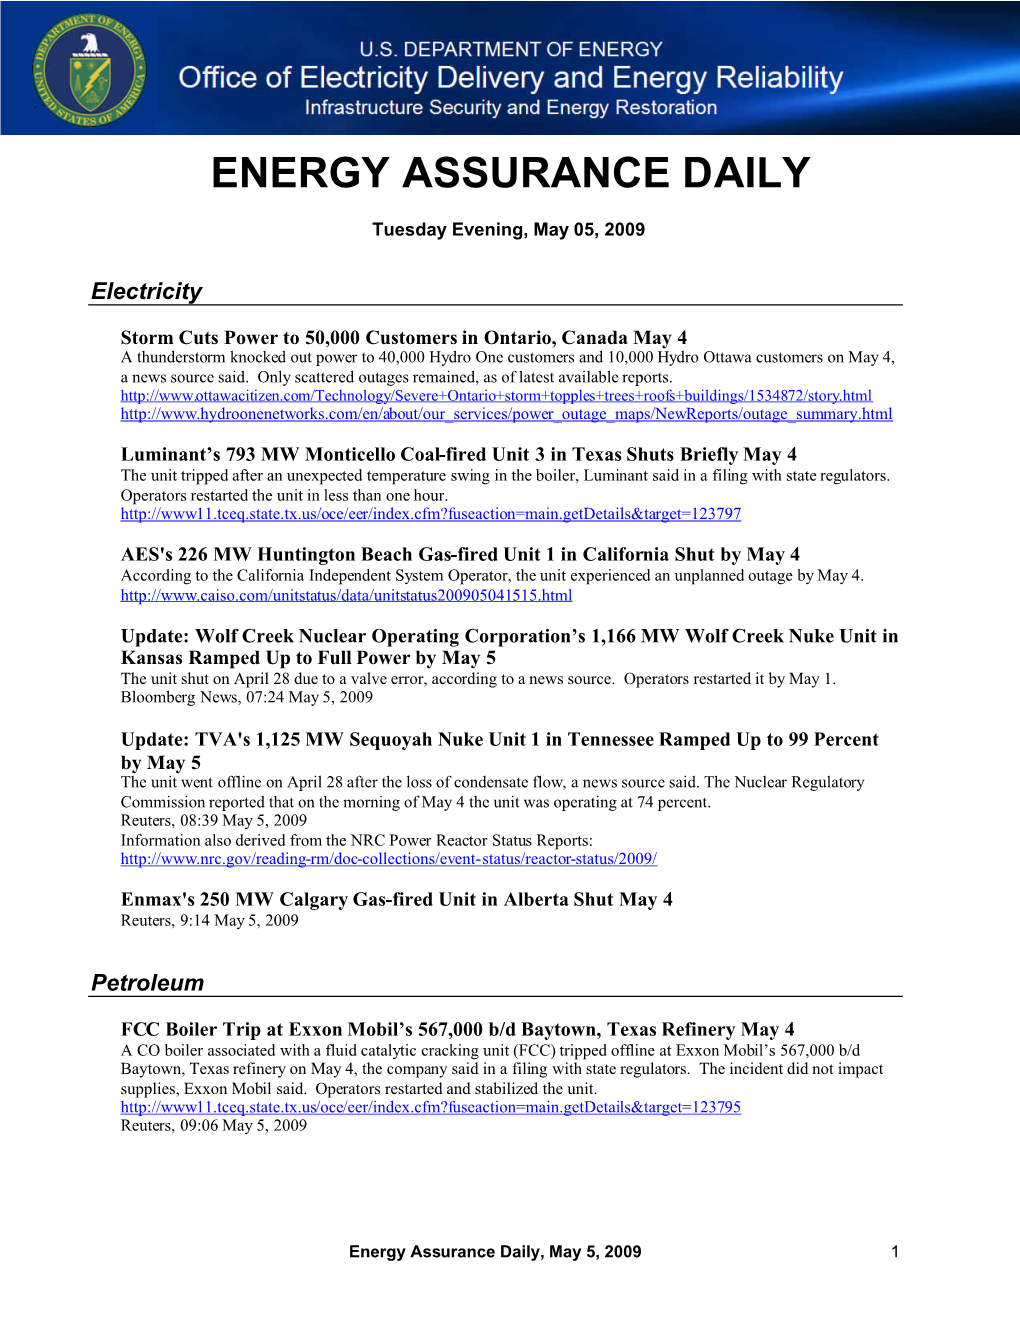 Energy Assurance Daily, May 5, 2009